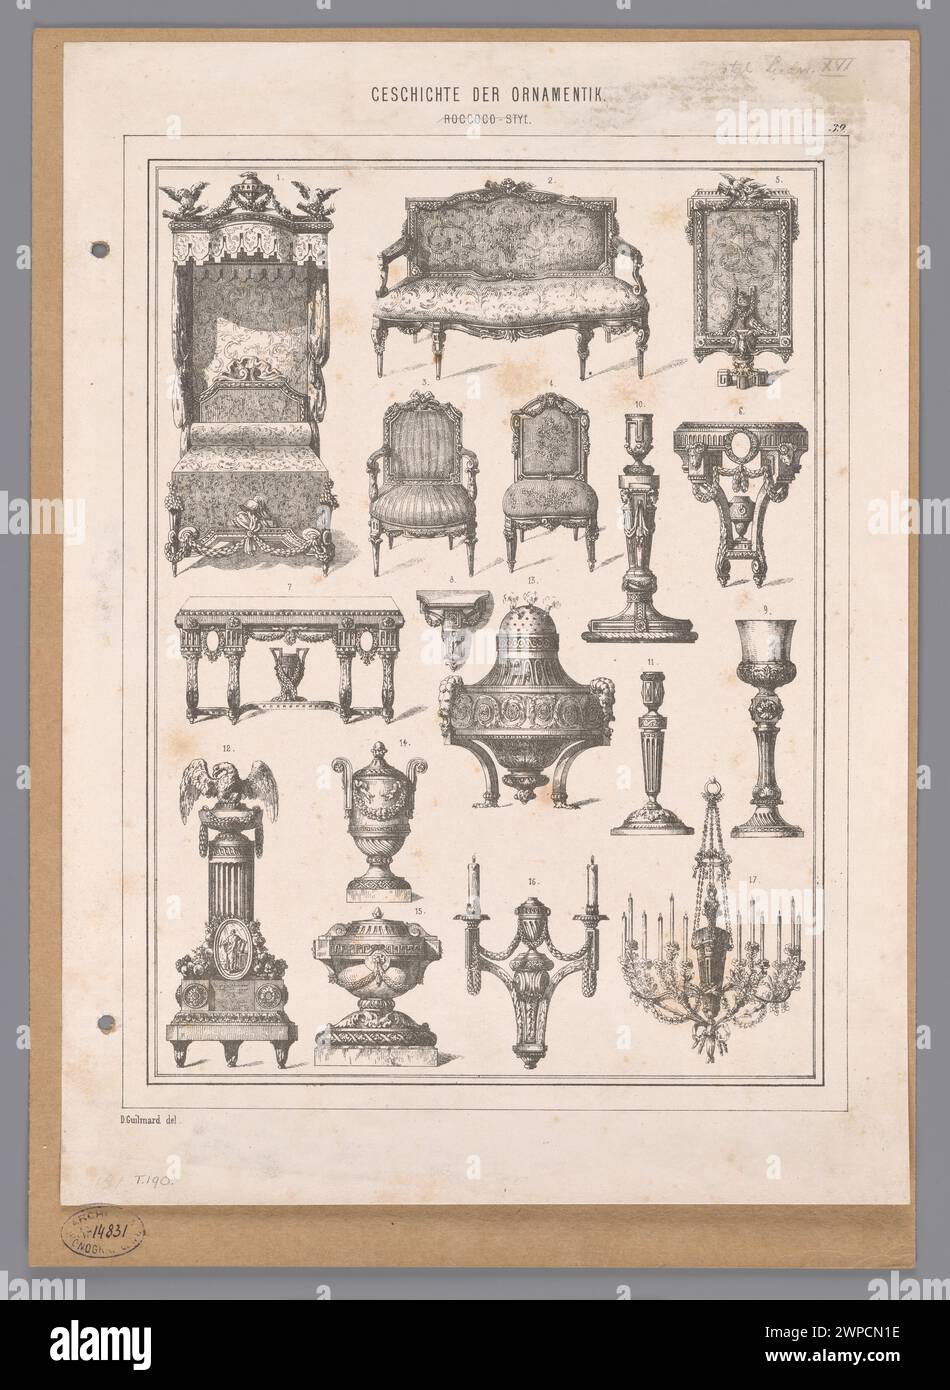 Divine examples of the Crafts from the 18th century (style of Louis XVI), from: Geschichte der Ornamentik; Guilmard, Desire (1810-1885); 19th century (1835-00-00-1860-00-00); Stock Photo